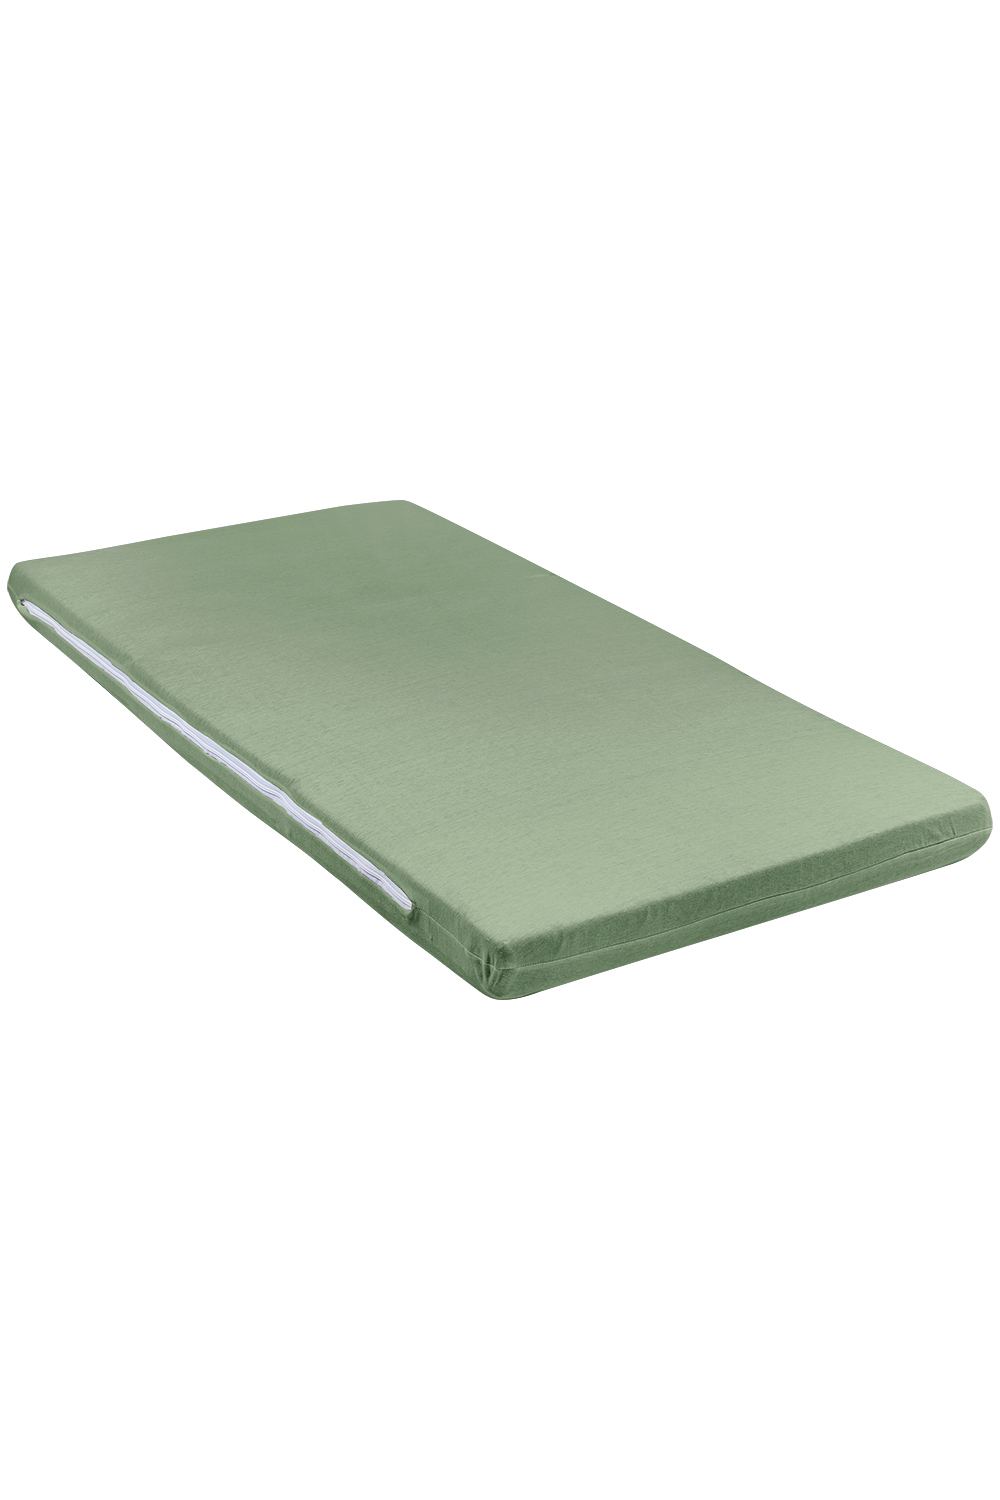 Camping bed mattress cover deluxe Uni - forest green - 60x120cm